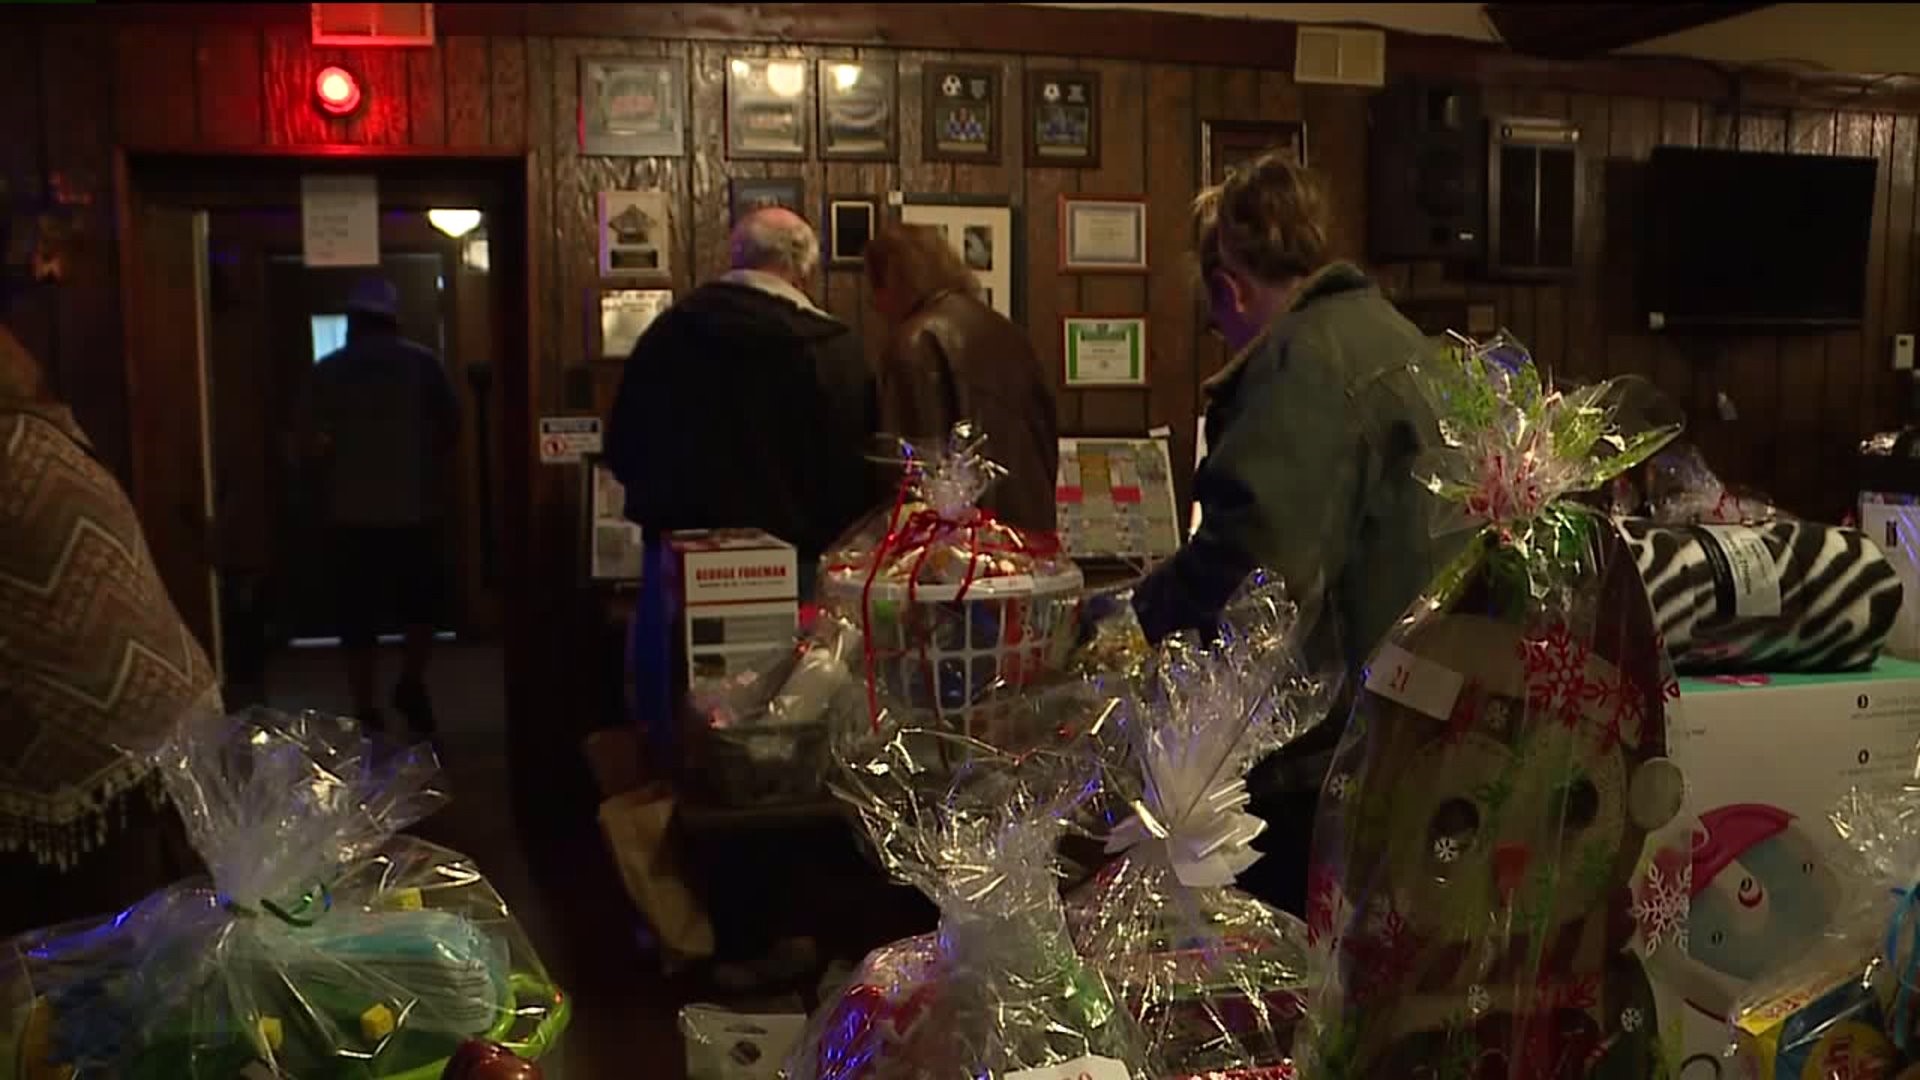 Fundraiser for Fire Victims in Luzerne County